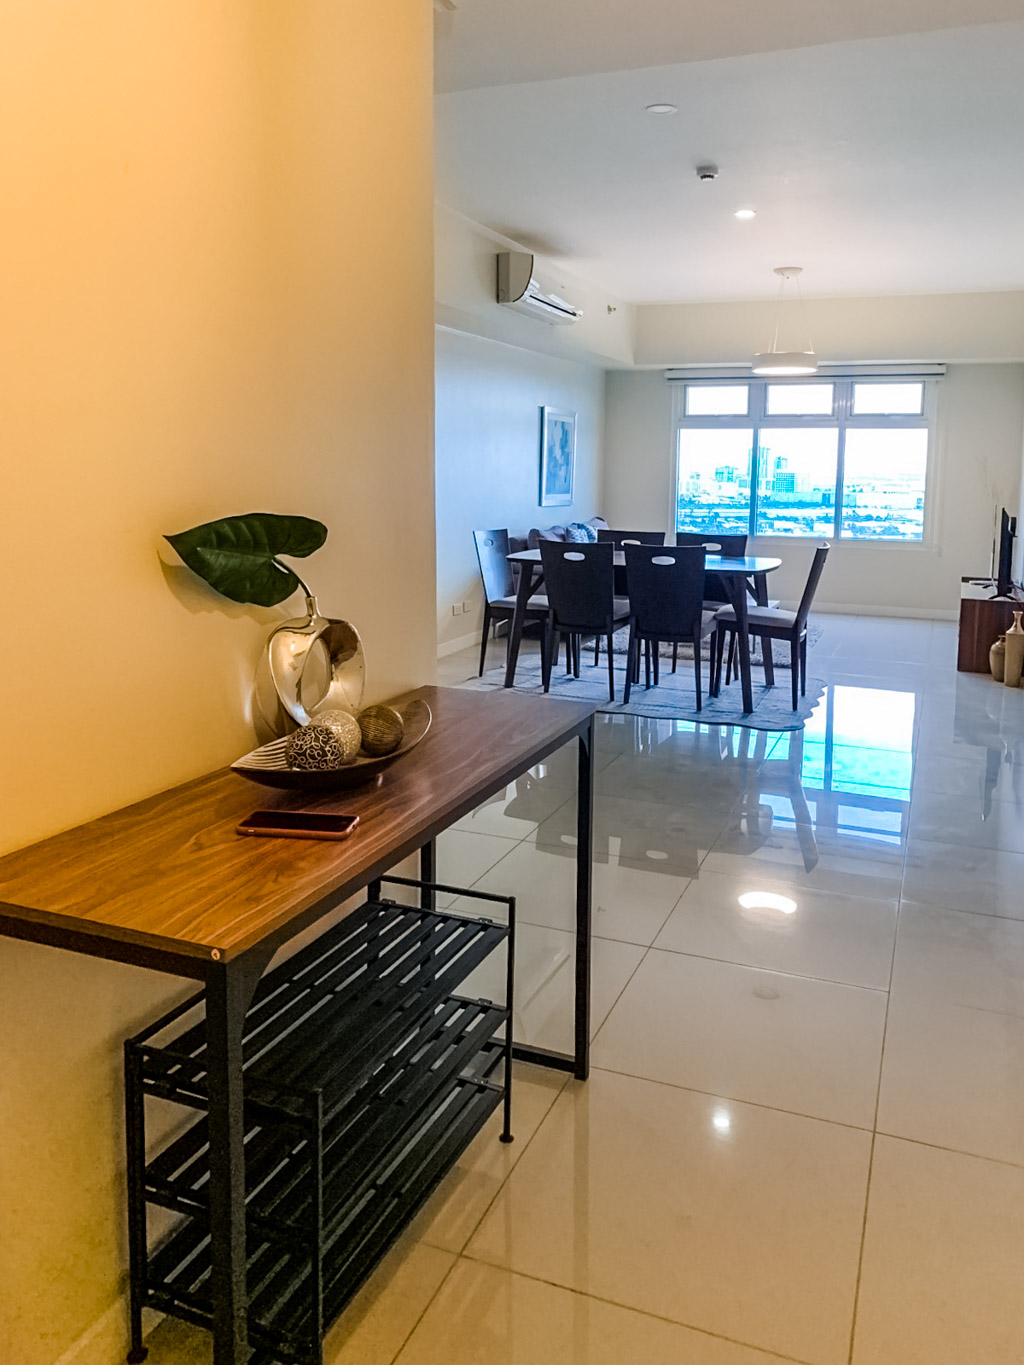 RCSP4 Furnished 2 Bedroom Condo for Rent in Cebu Business Park - 2